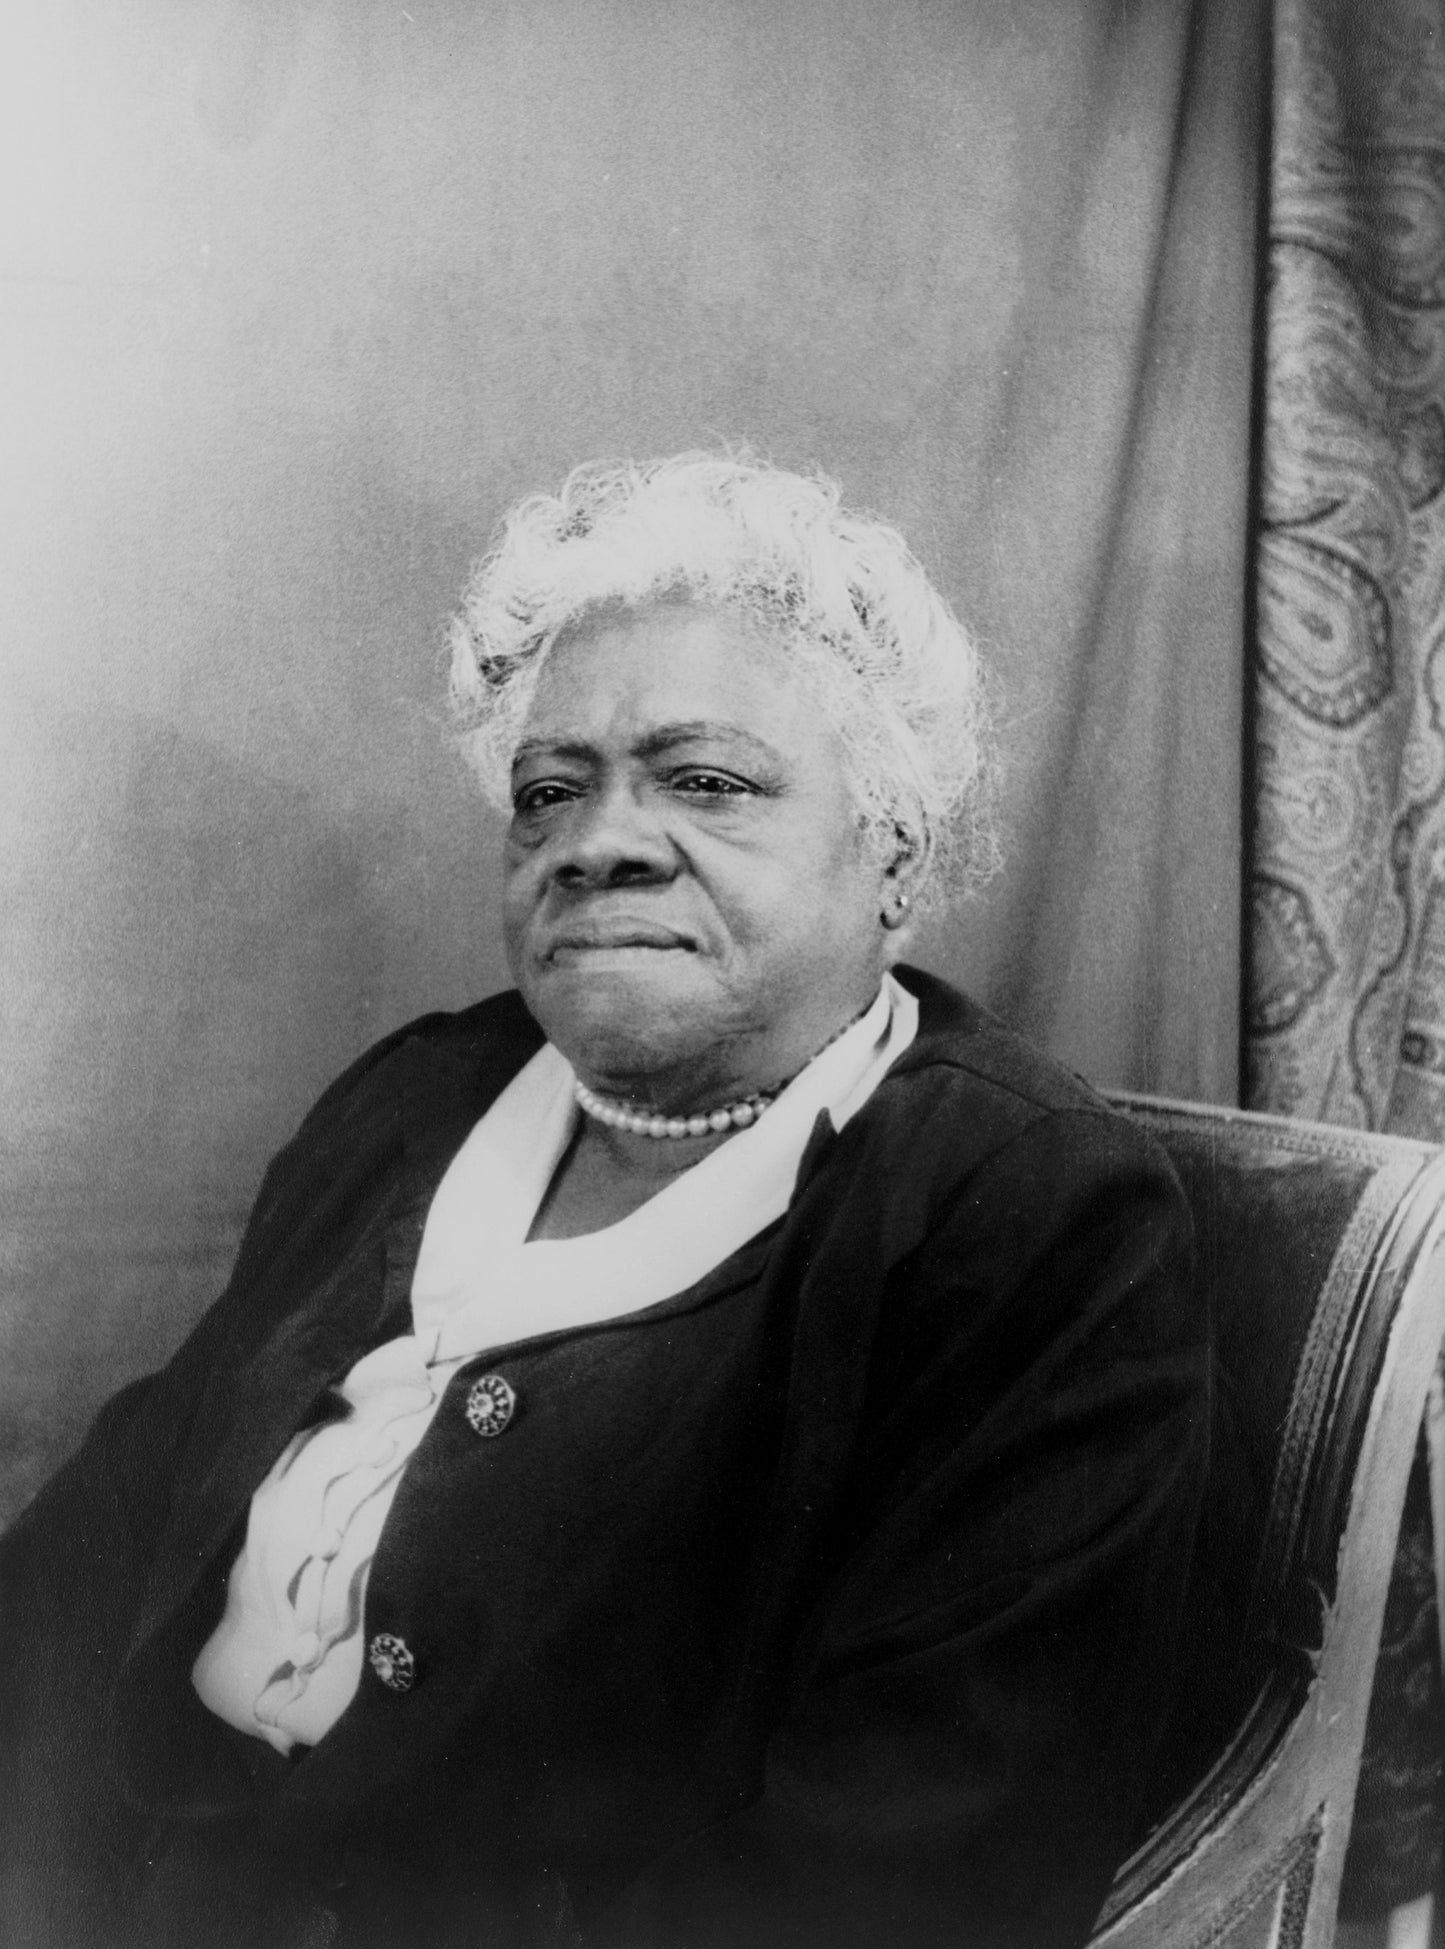 MARY MCLEOD BETHUNE GLOSSY POSTER PICTURE PHOTO PRINT BANNER black educator